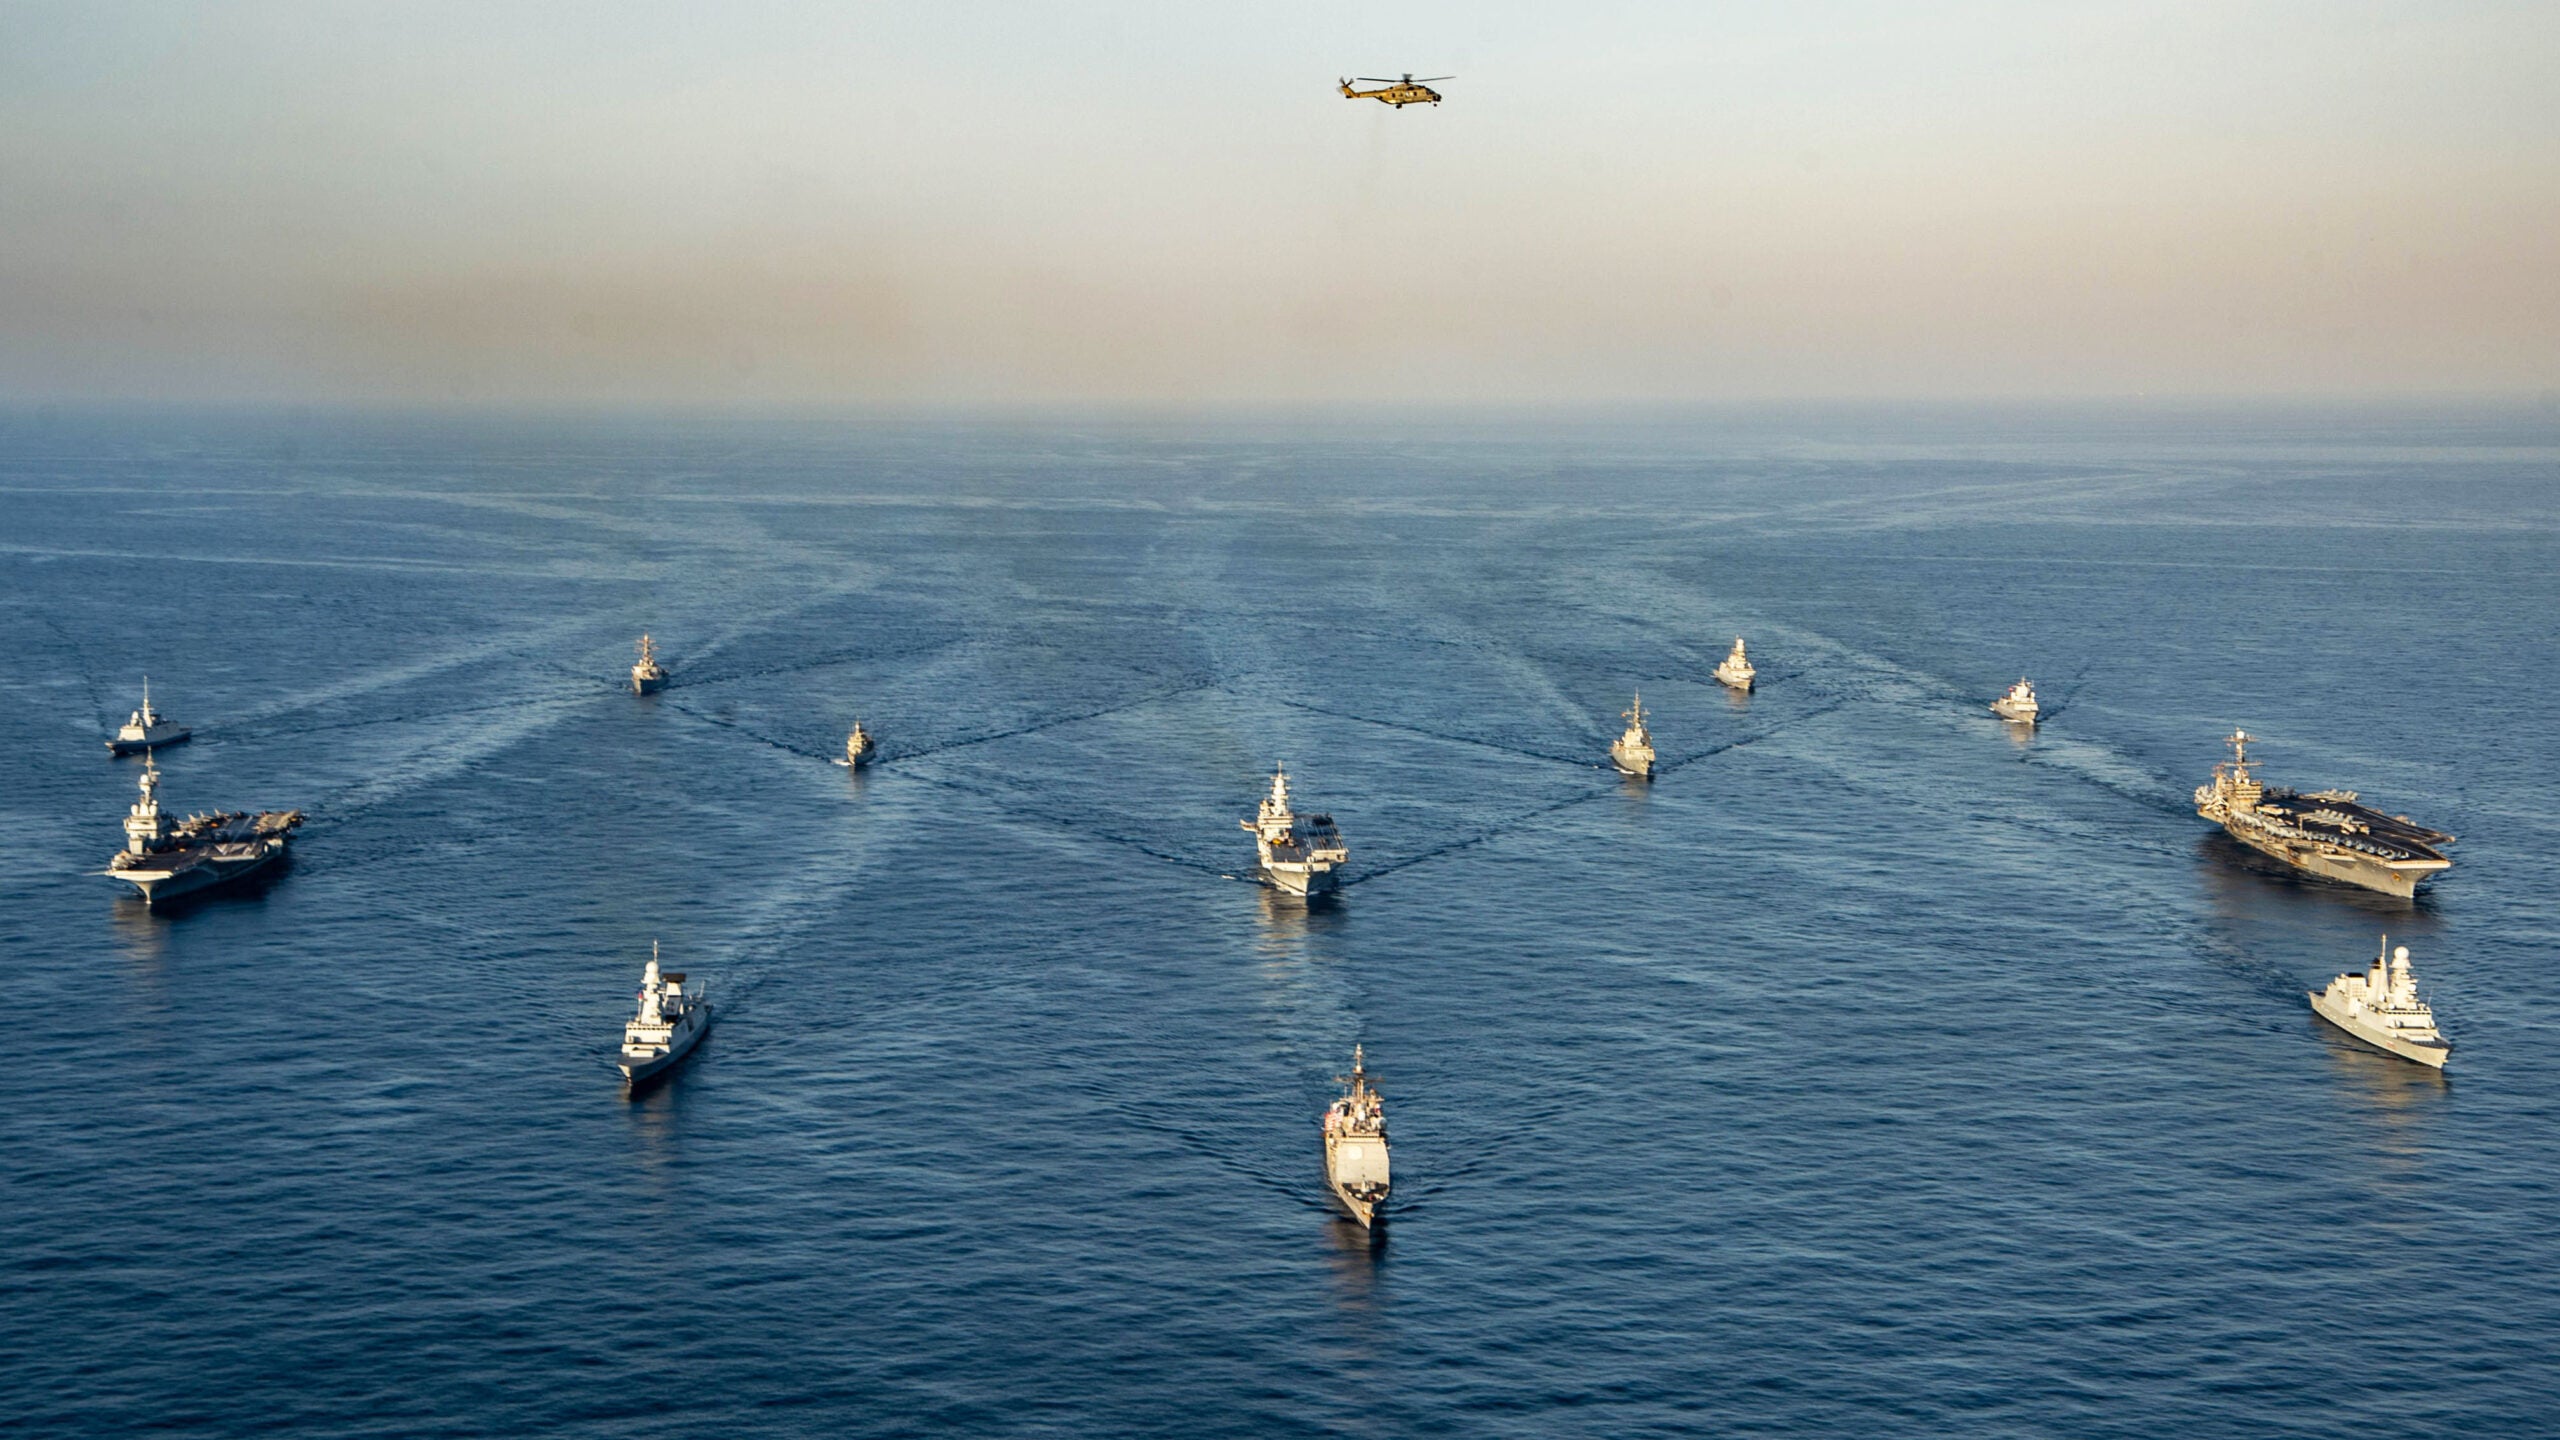 Three NATO Carrier Groups Are Exercising Together In The Mediterranean